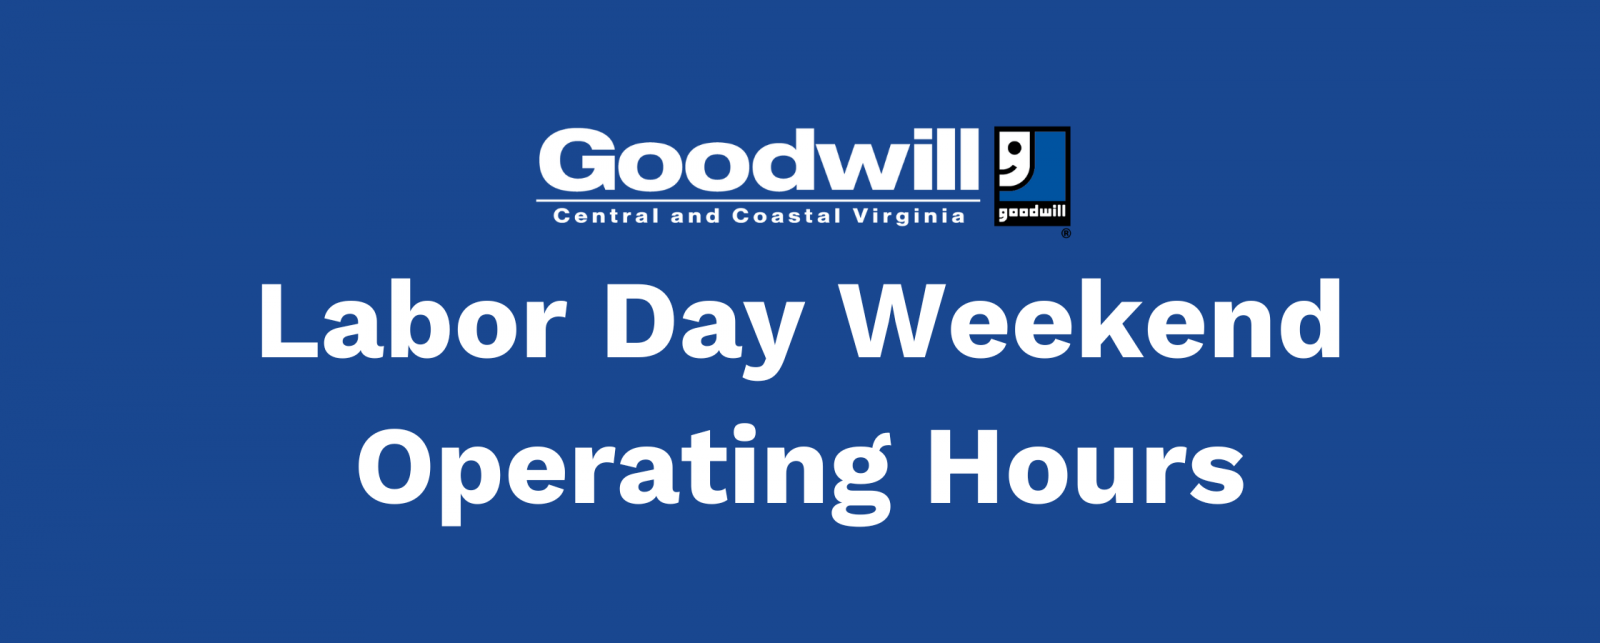 Goodwill Central and Coastal Virginia Stores Now Open Goodwill of